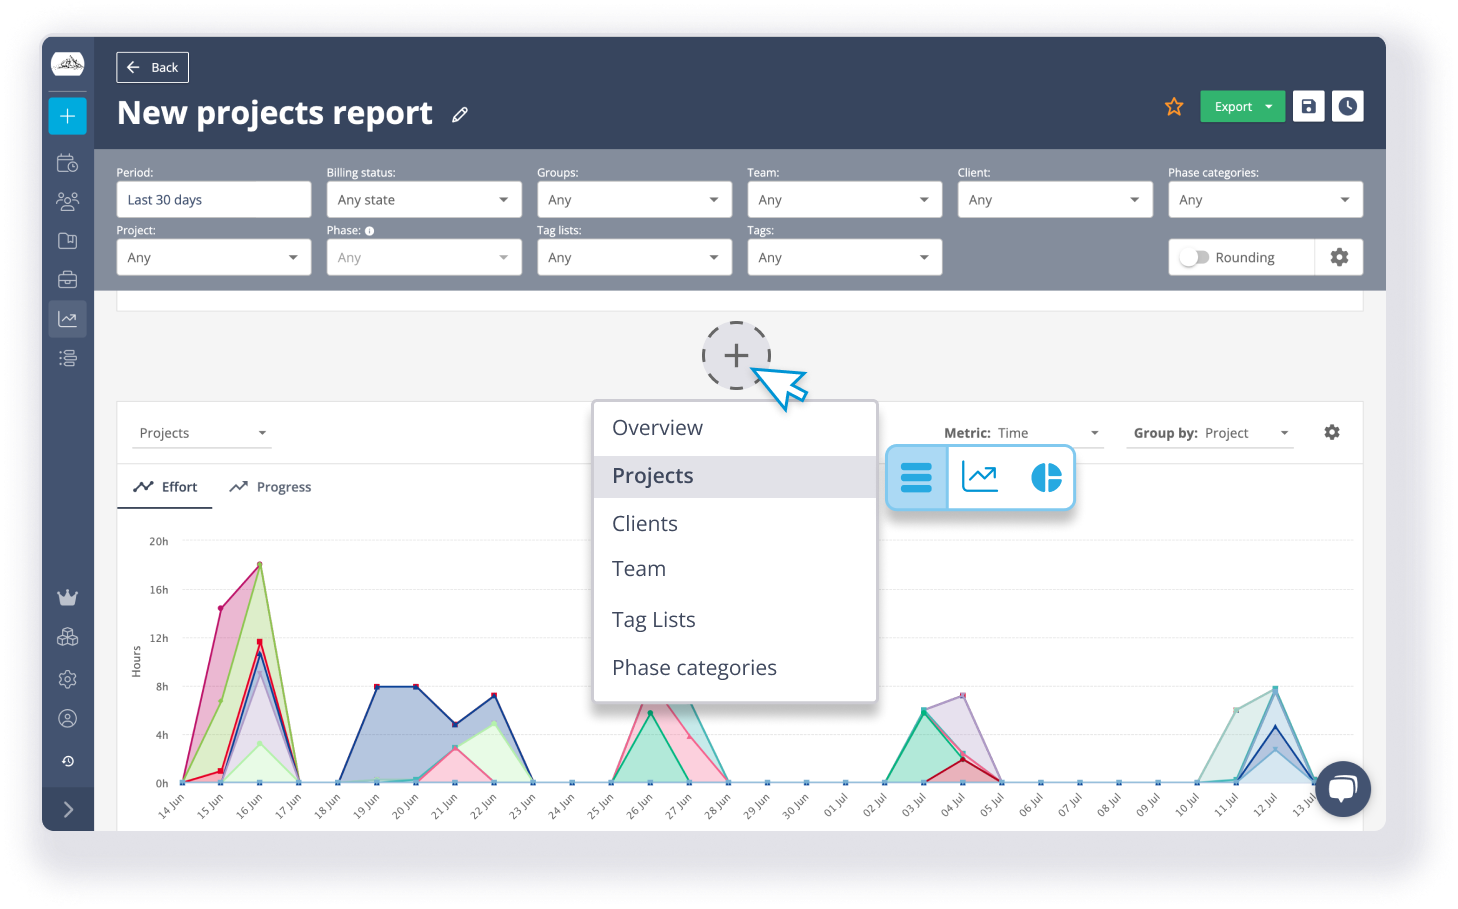 Customizable reports for informed decision making